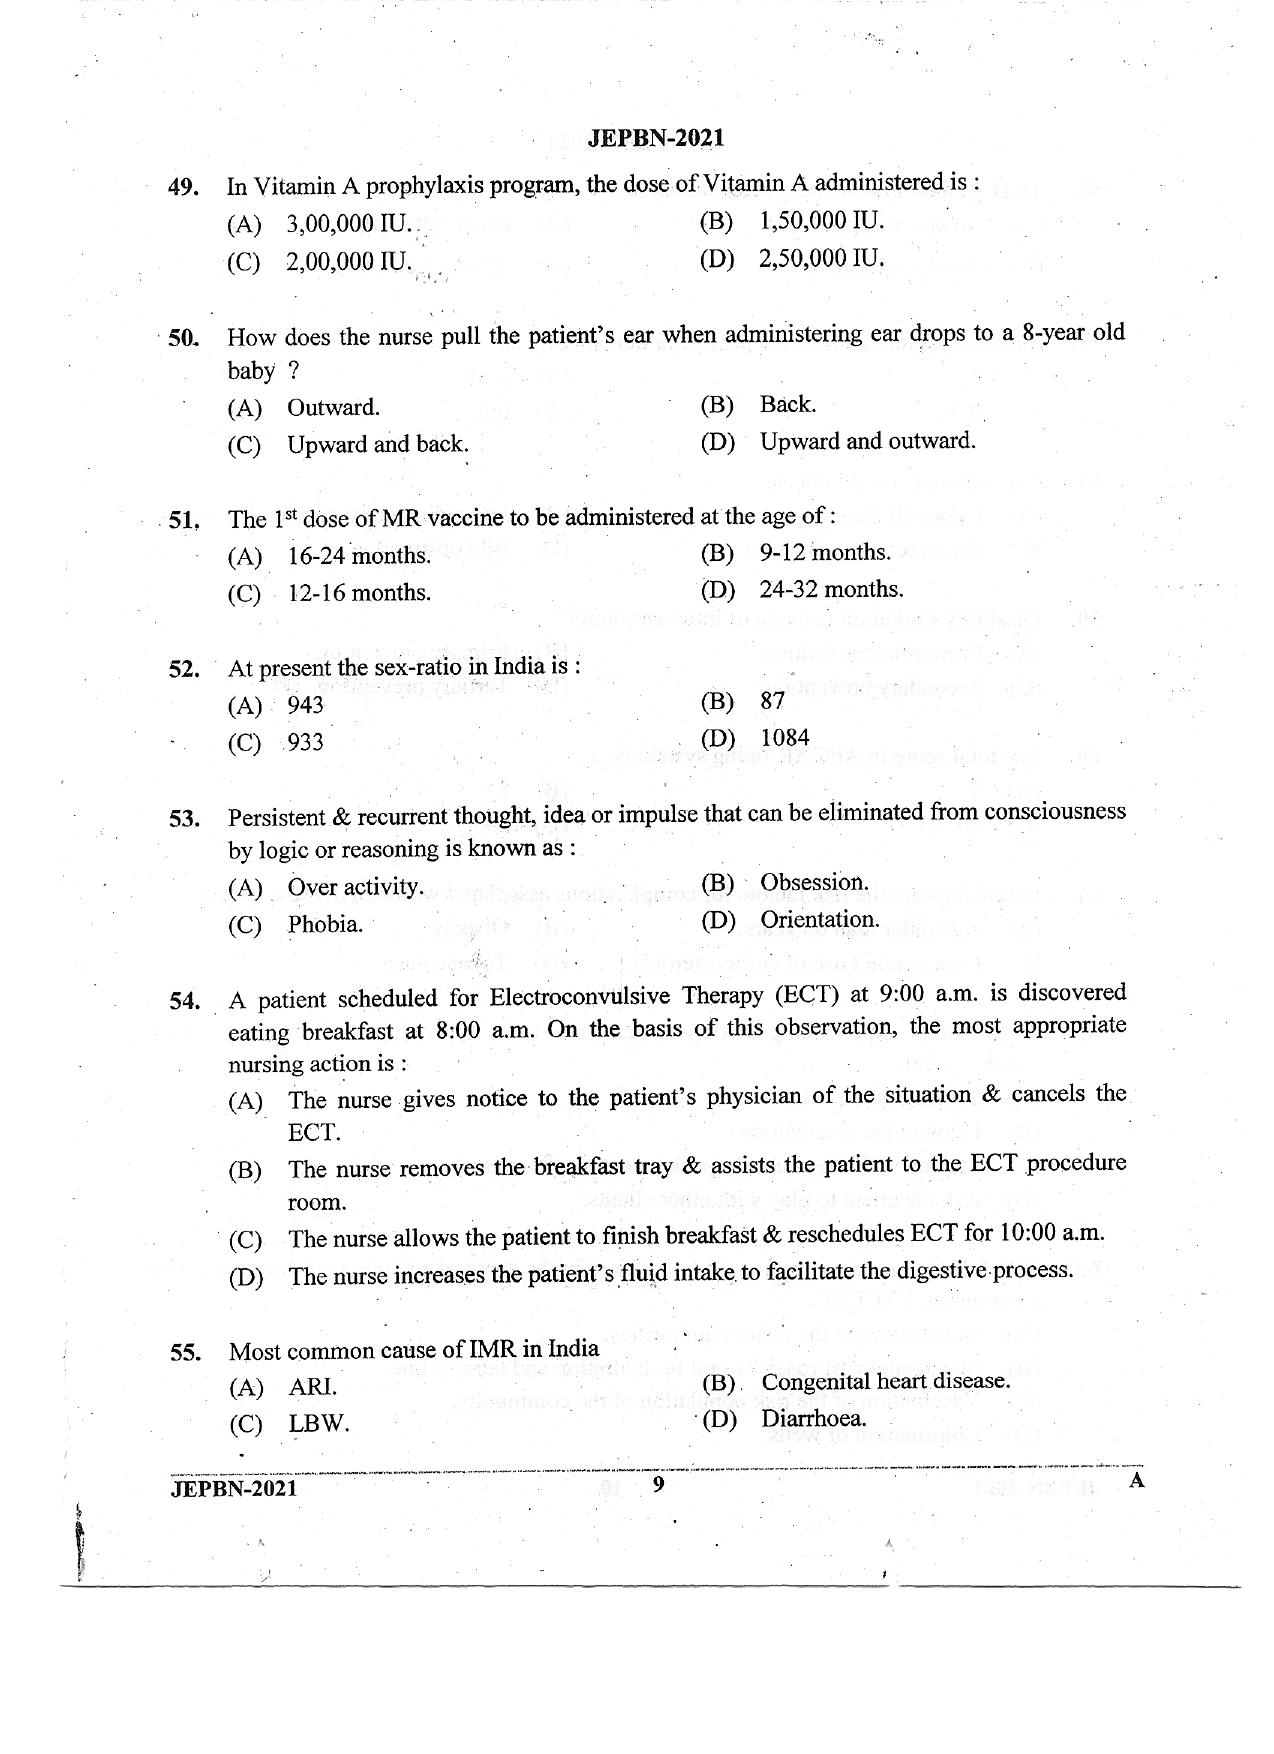 WBJEE JEPBN 2021 Question Paper - Page 9